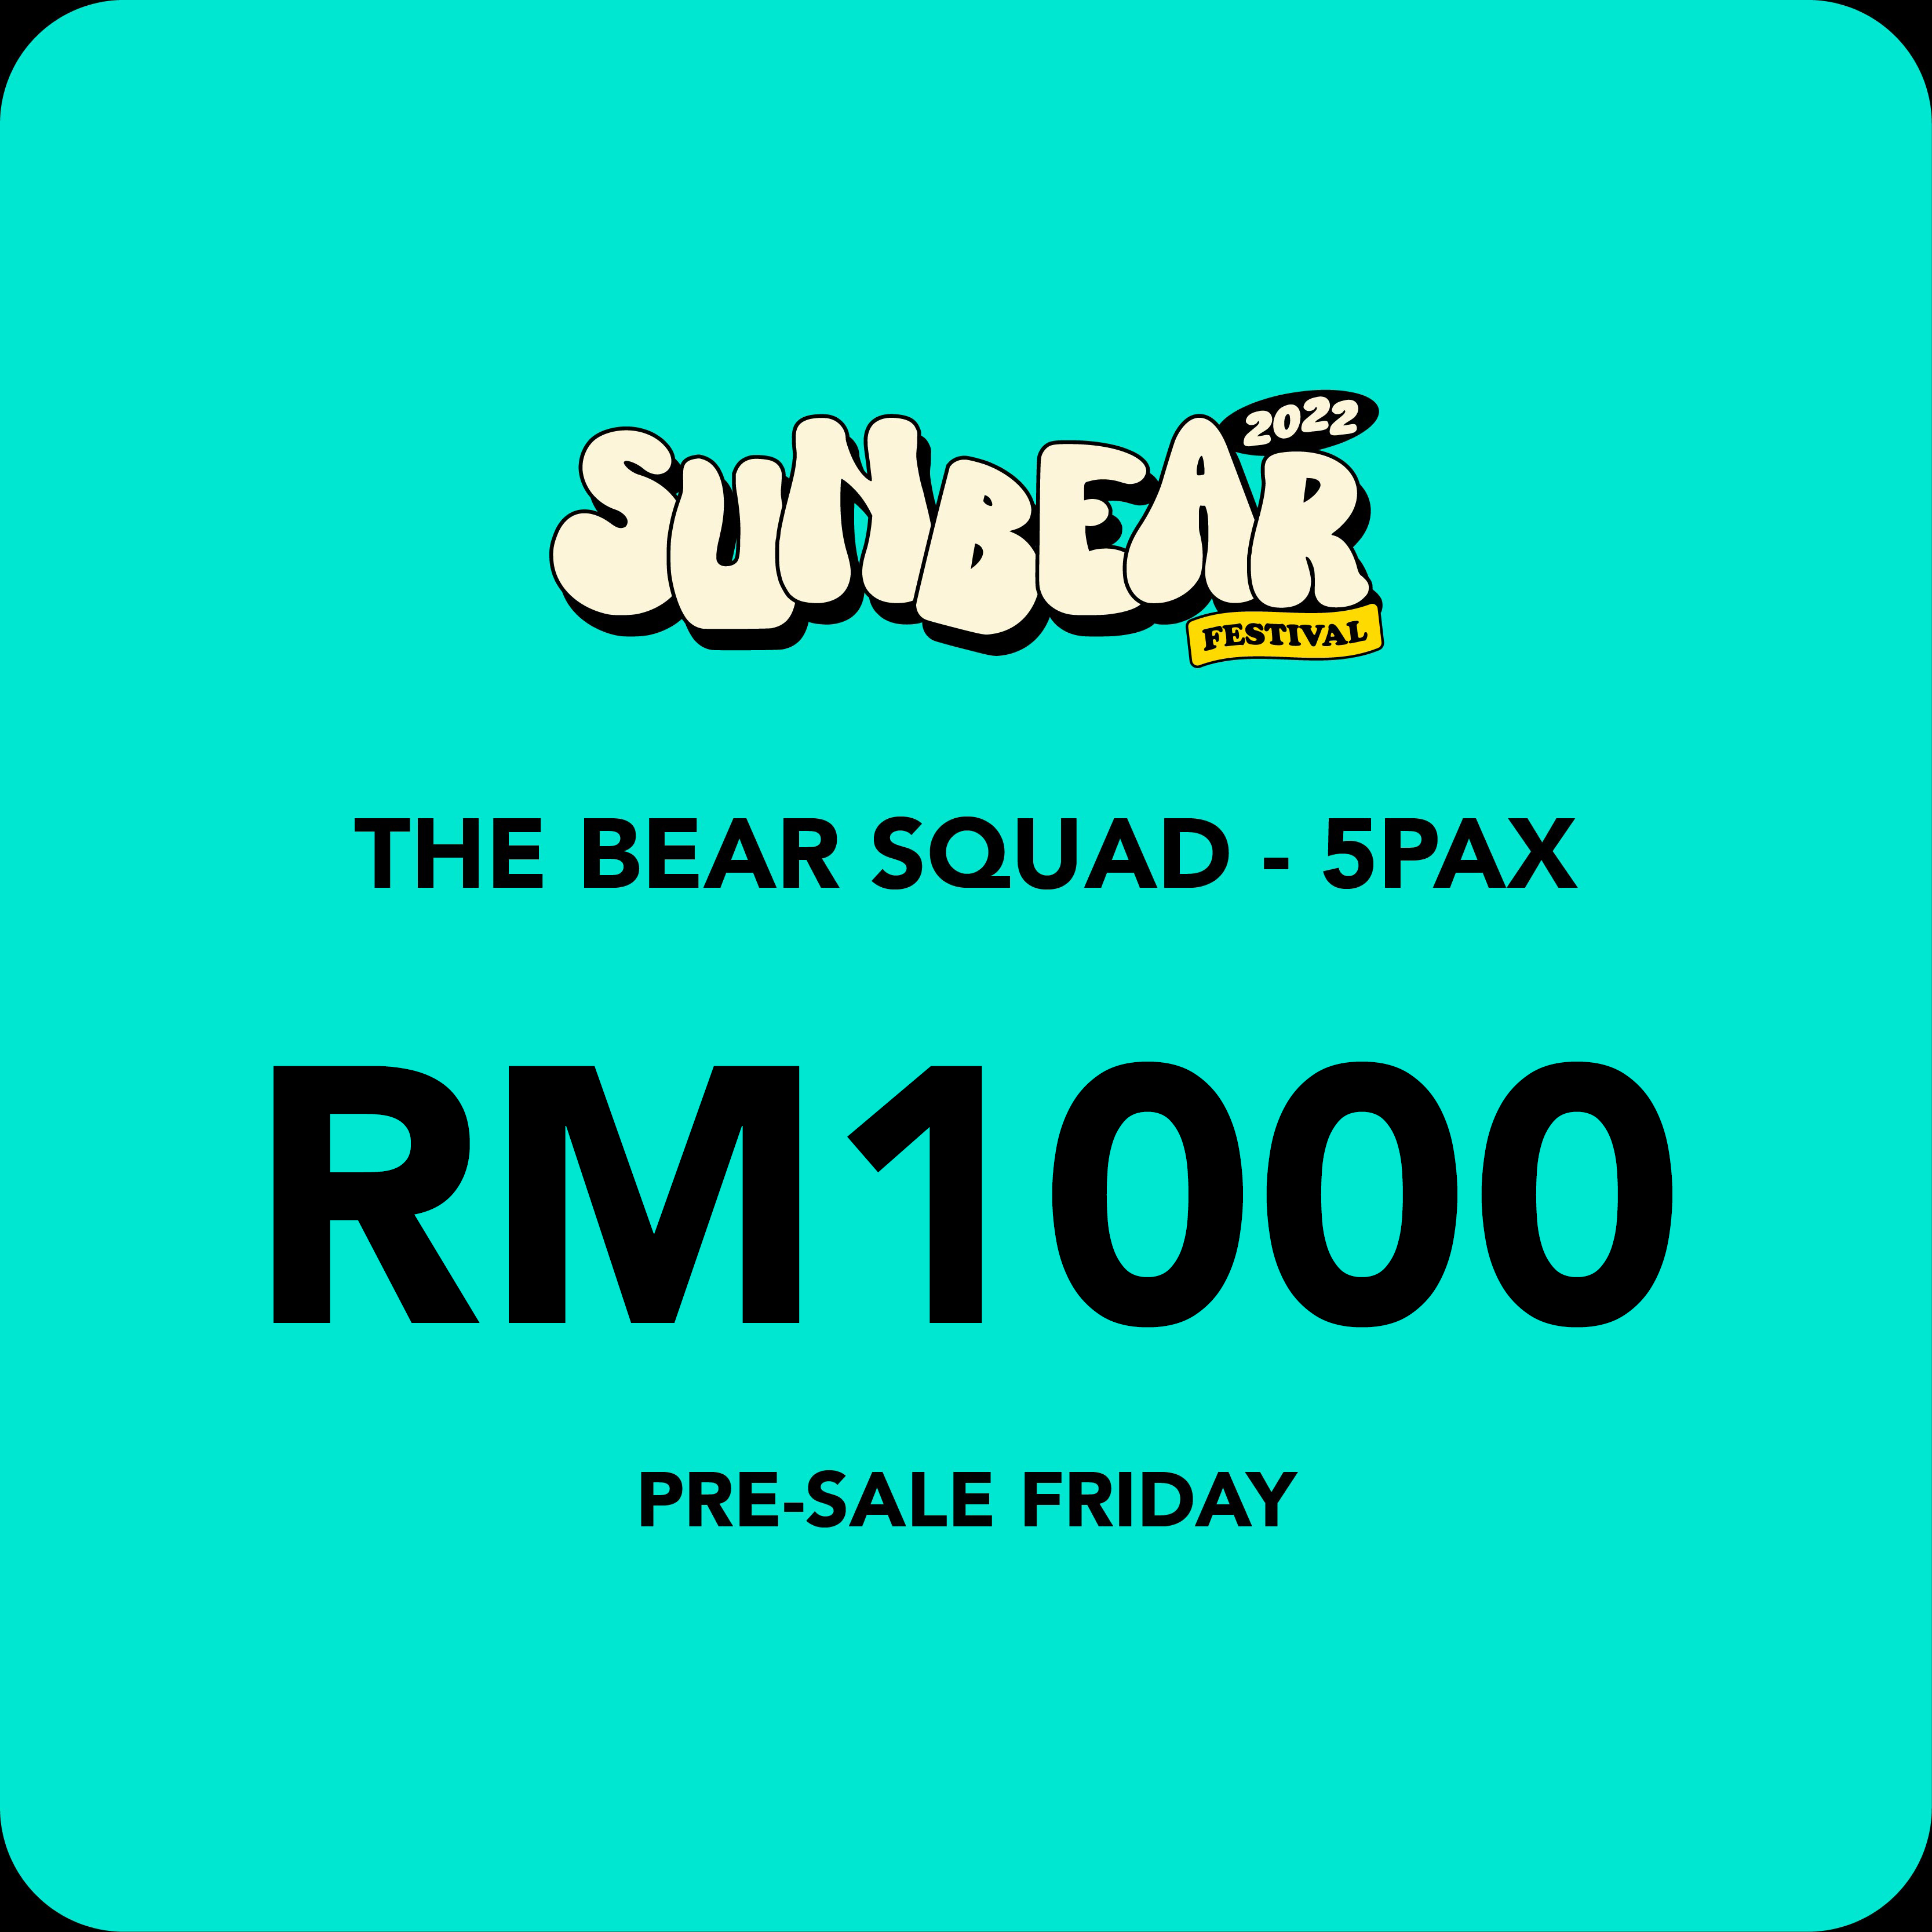 THE BEAR SQUAD PRE-SALE FRIDAY - 5 PAX